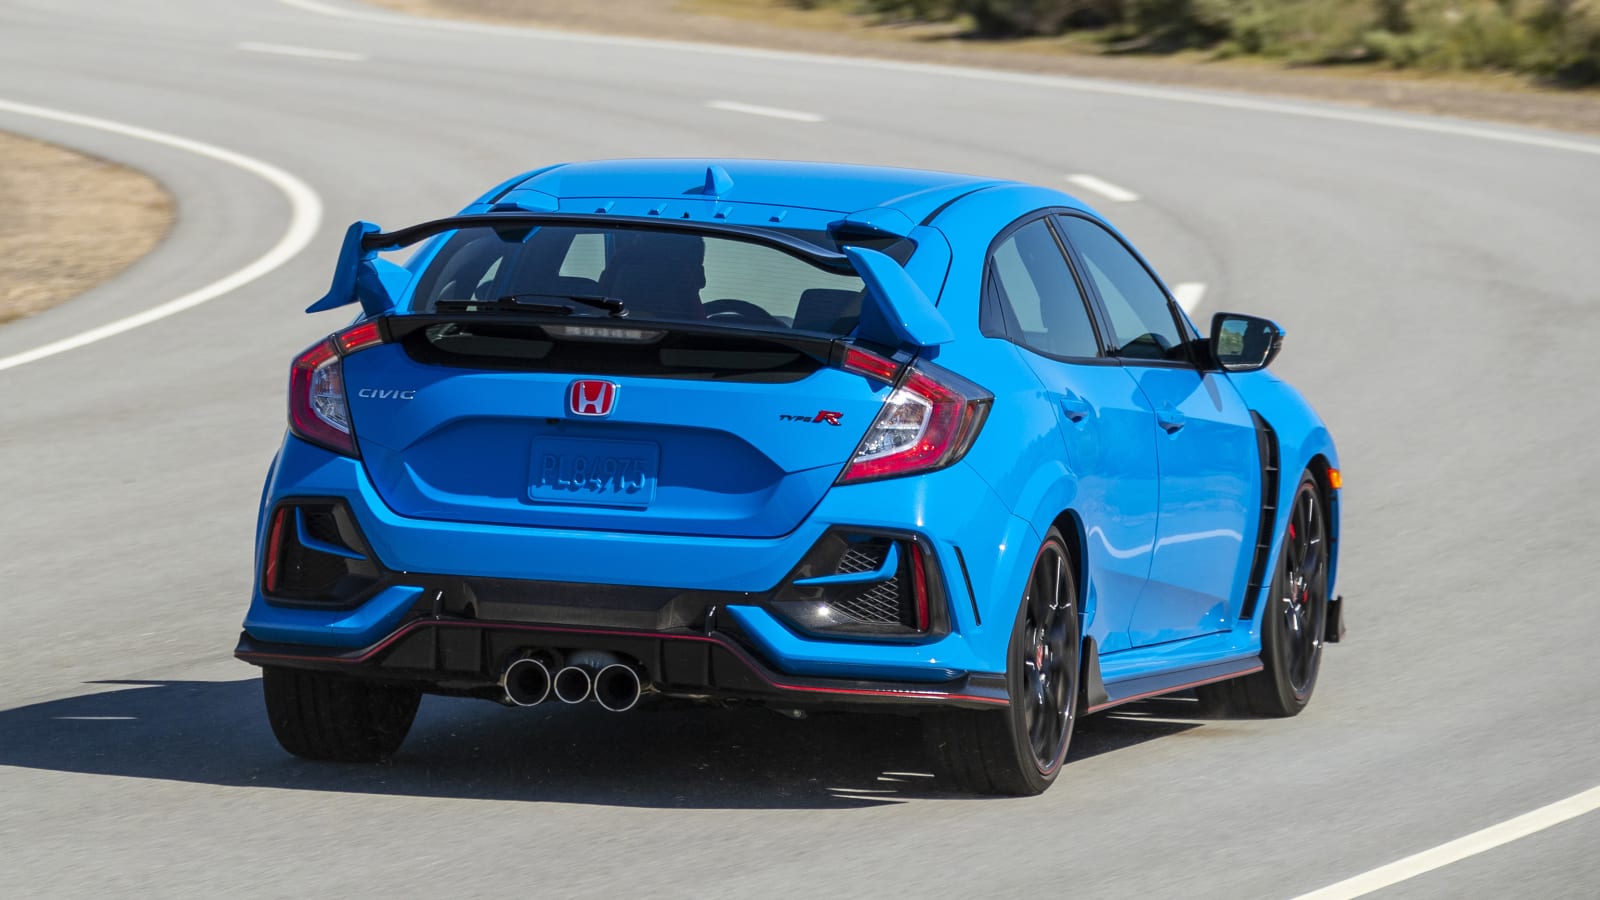 2021 Honda Civic Review | What's new, discontinued versions, pictures